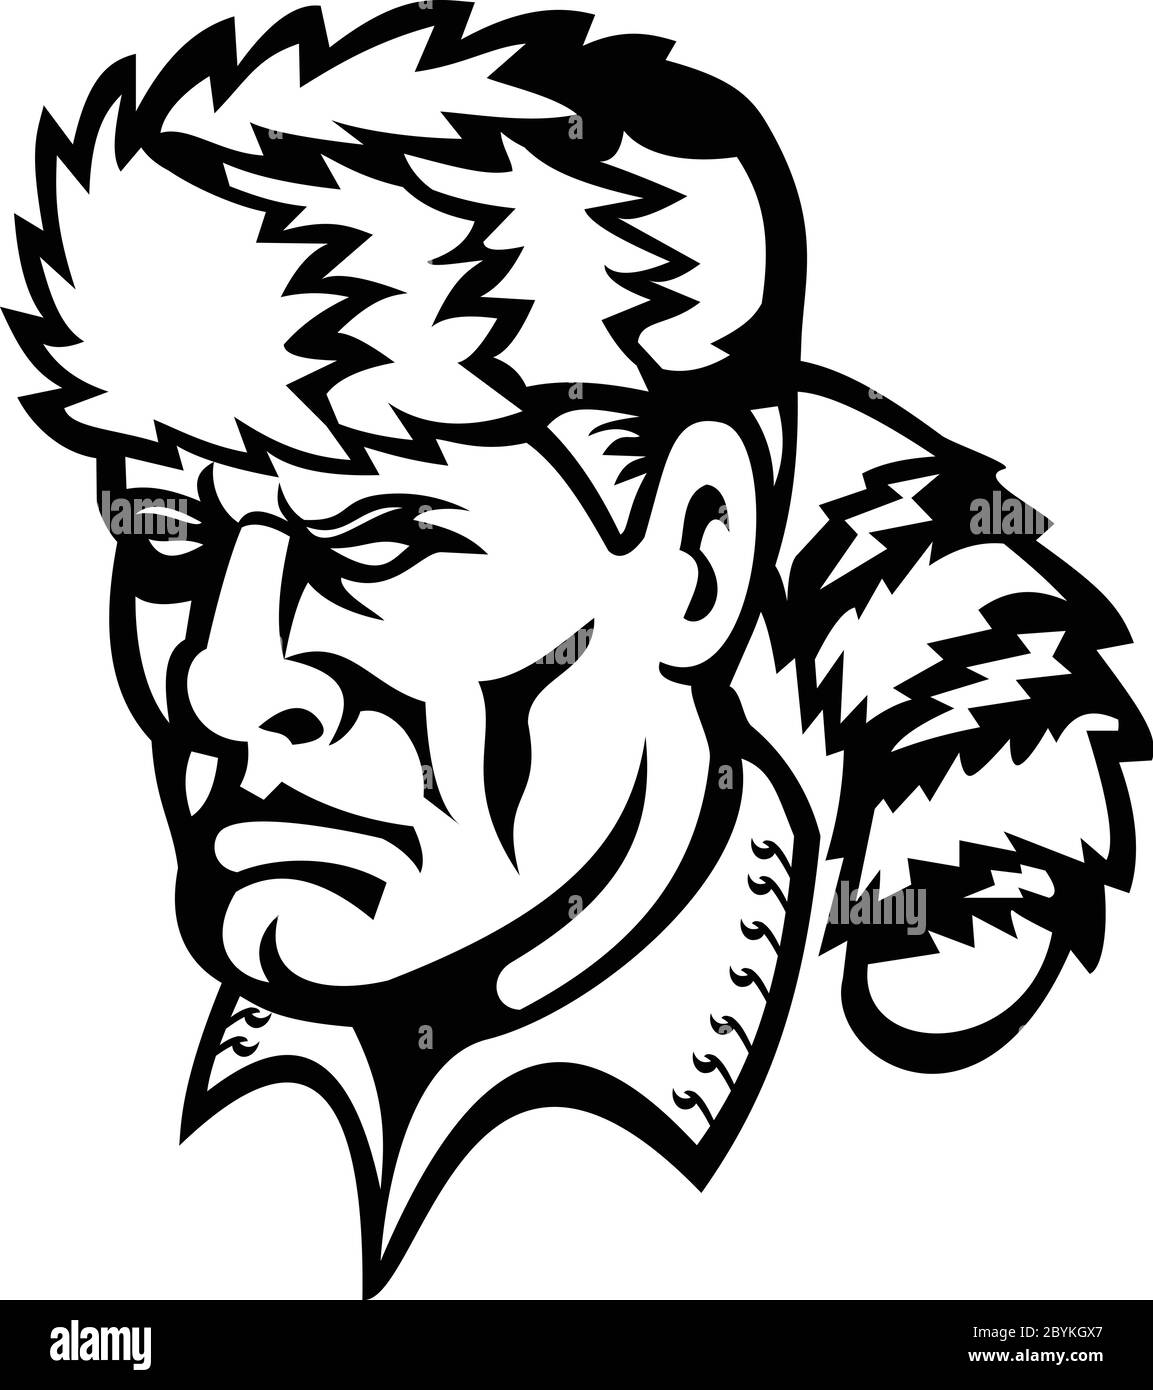 Mascot icon illustration of head of David Davy Crockett, an American folk hero, frontiersman, soldier and politician, nicknamed 'King of the Wild Fron Stock Vector